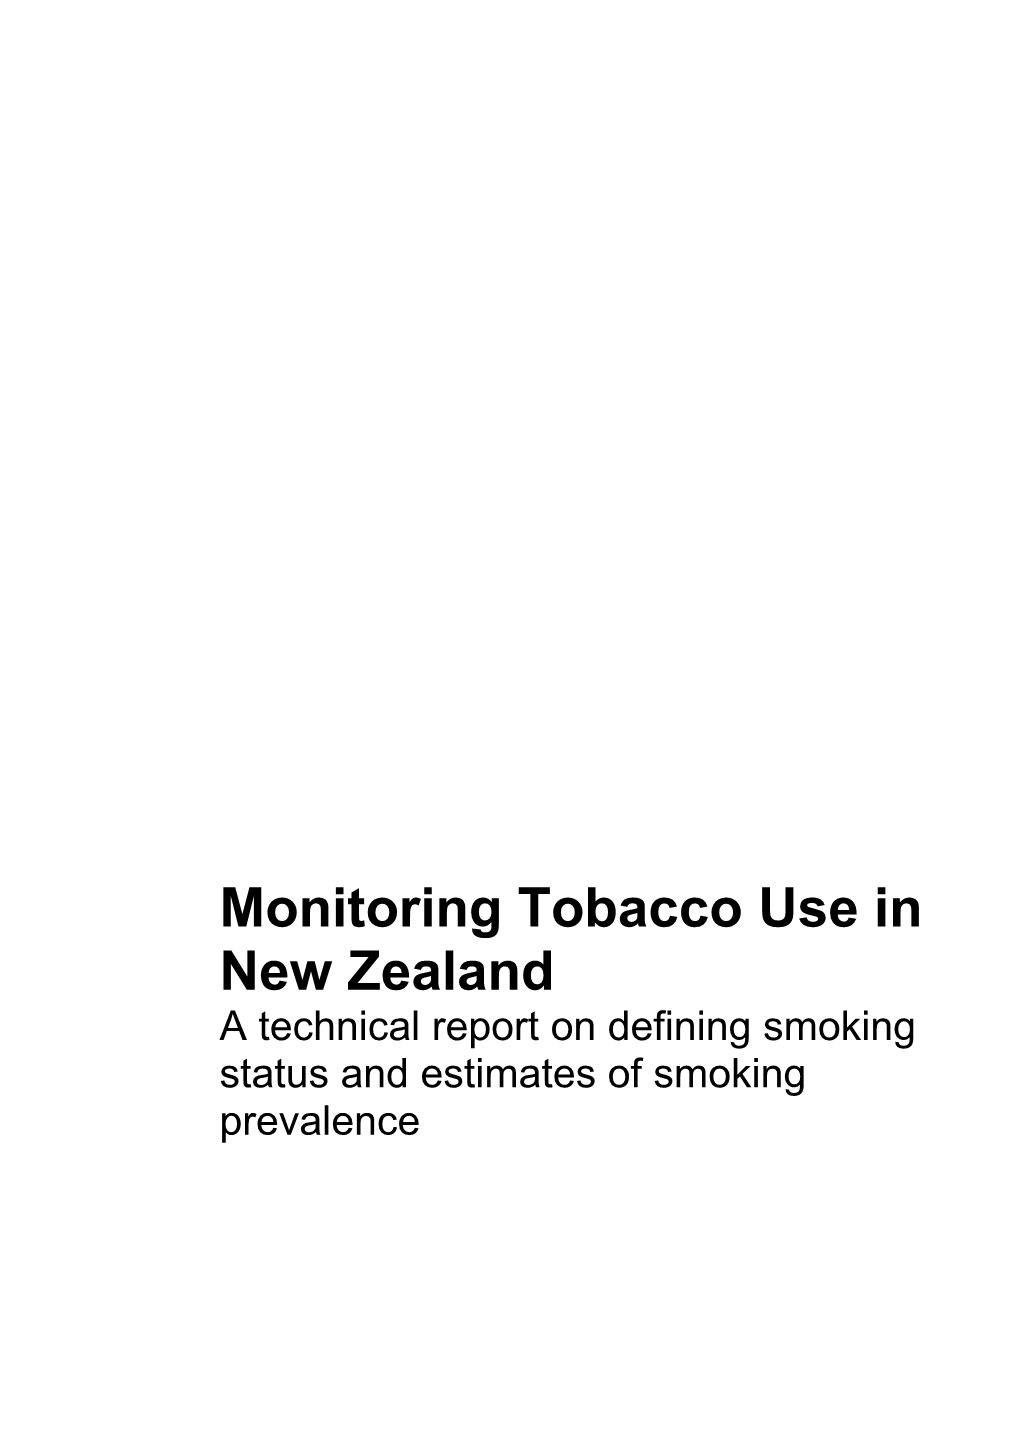 Monitoring Tobacco Use in New Zealand